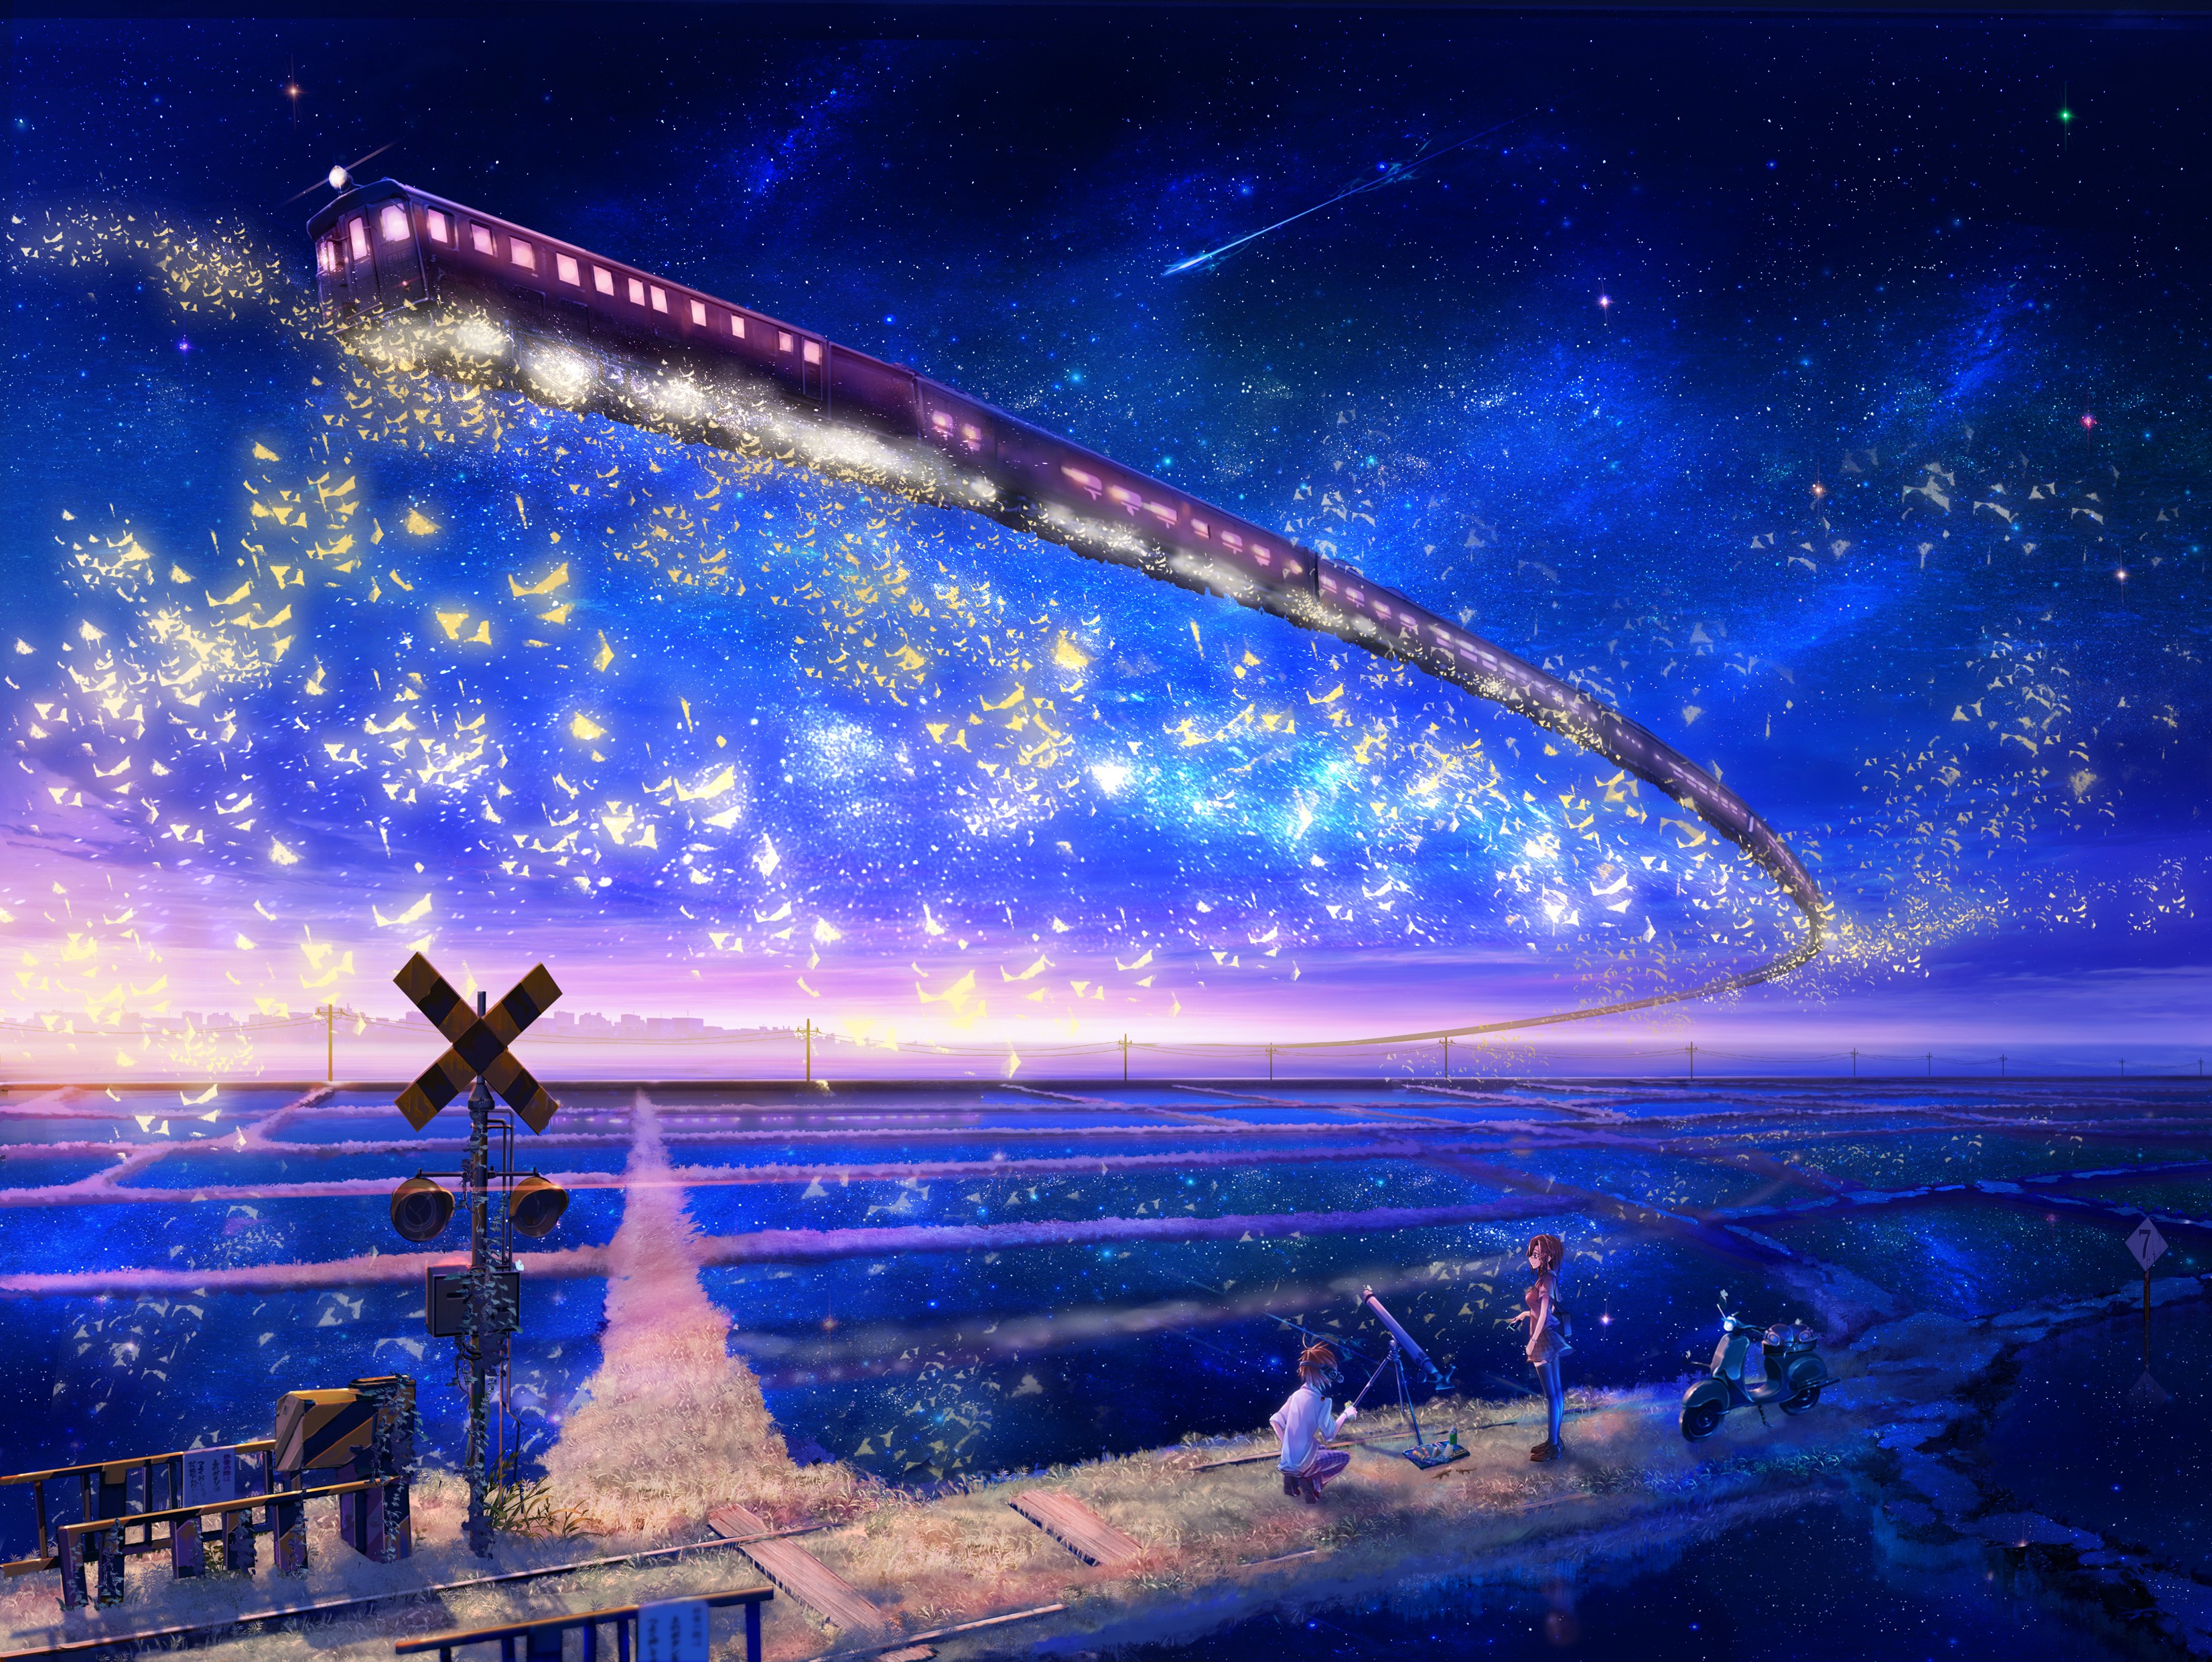 stars, Trains, Telescope, Scooters, Scenic, Anime, Anime, Boys, Skyscapes, Anime, Girls, Railway Wallpaper